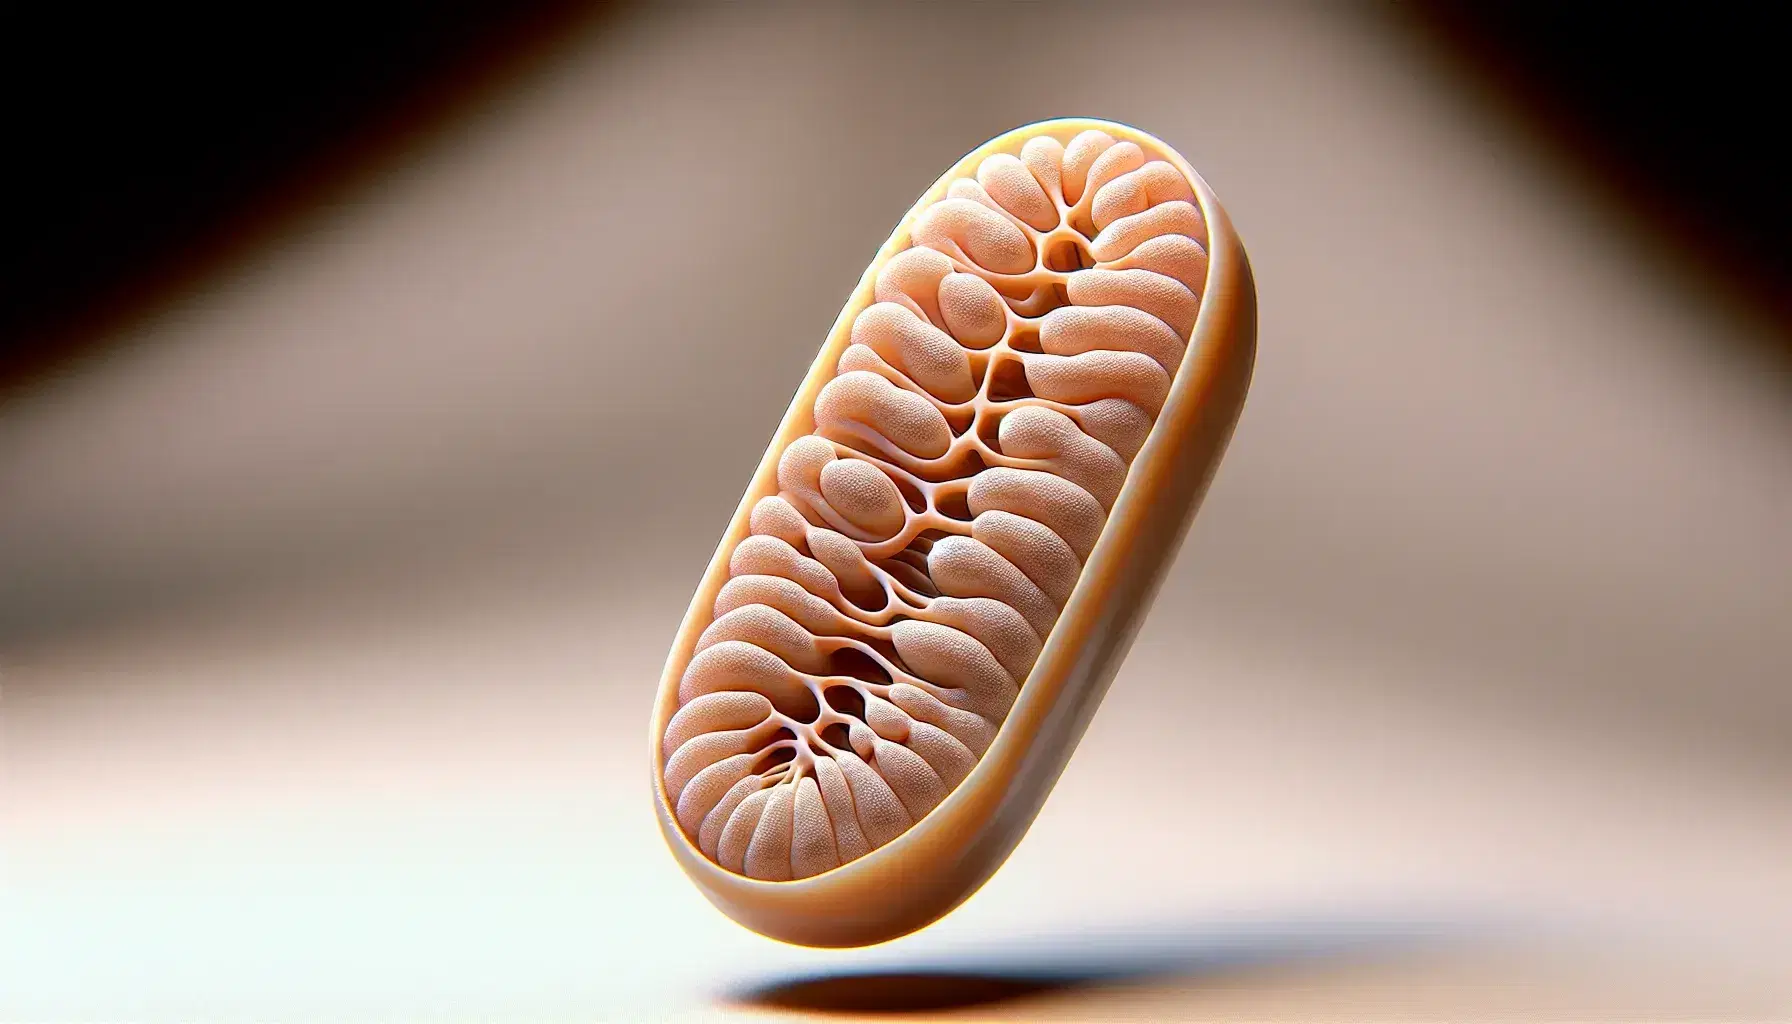 Detailed and realistic 3D model of a mitochondrion on a neutral background, with a pale pink external membrane and red internal cristae.